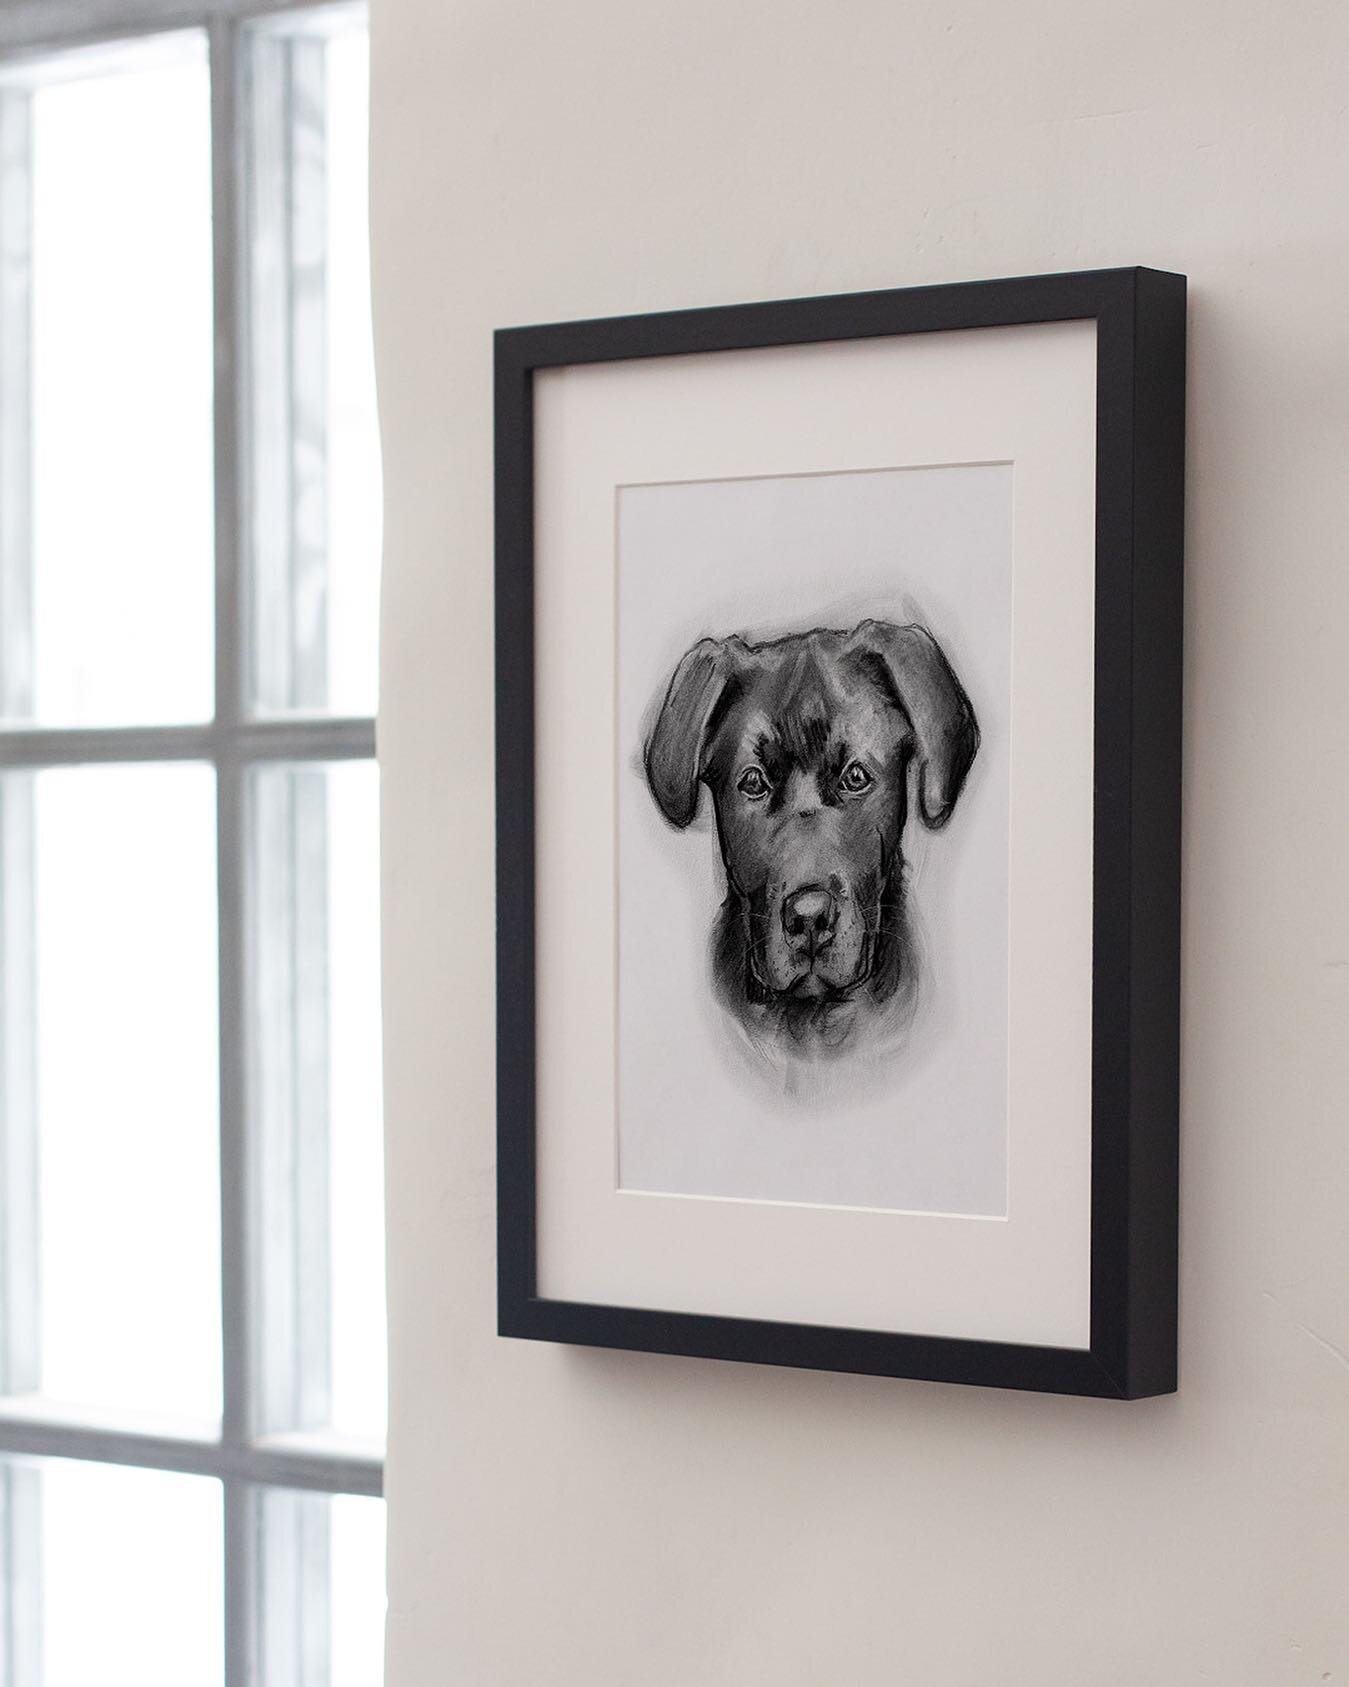 Surround yourself with art that sparks joy and celebrates the bond you share with your furry friend.

#fineart #dogsofinstagram #drawing #charcoaldrawing #custommade #homedesign